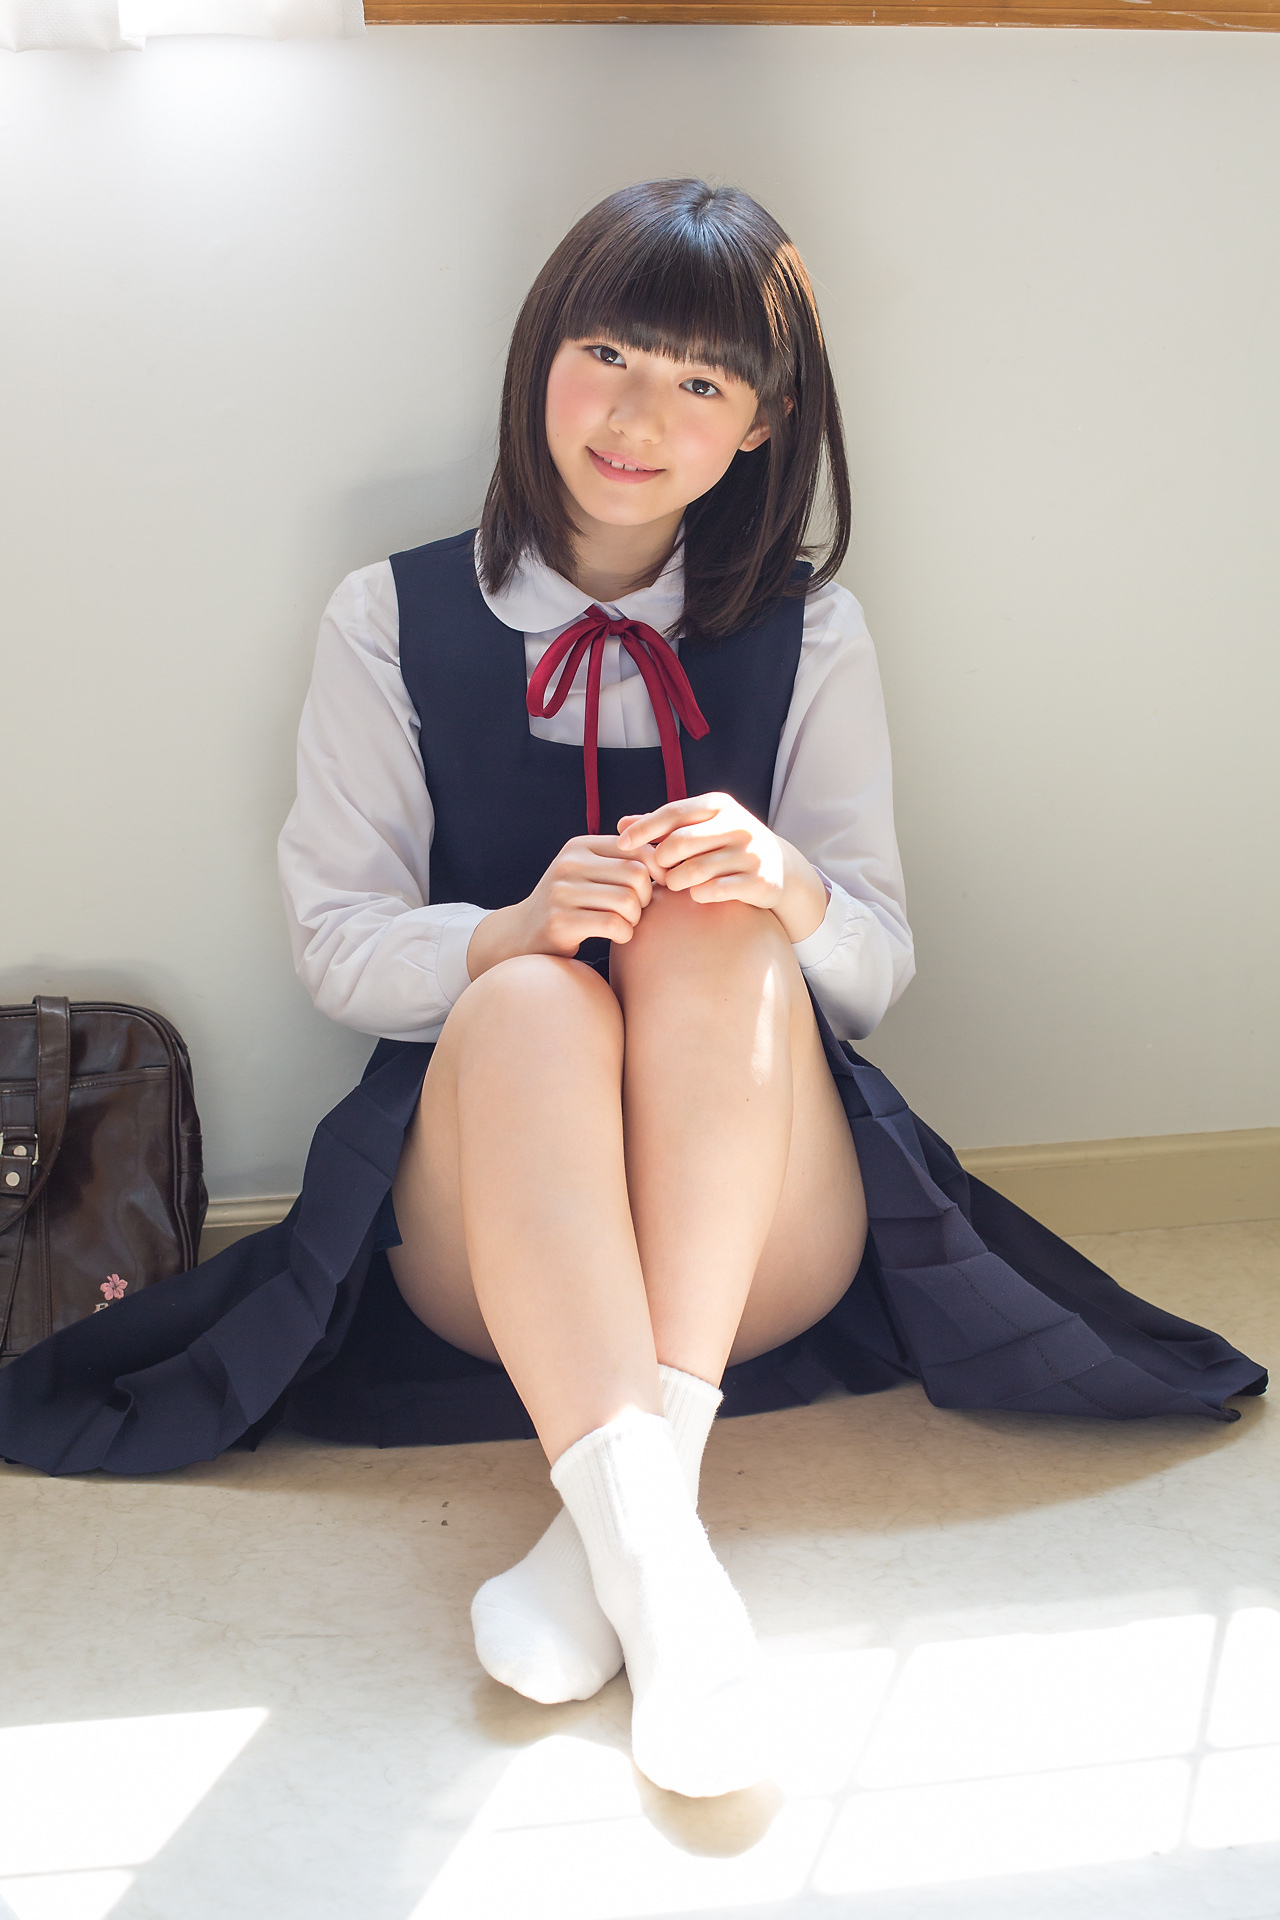 Minisuka.TV  July 18, 2019 - limited Gallery 2.1